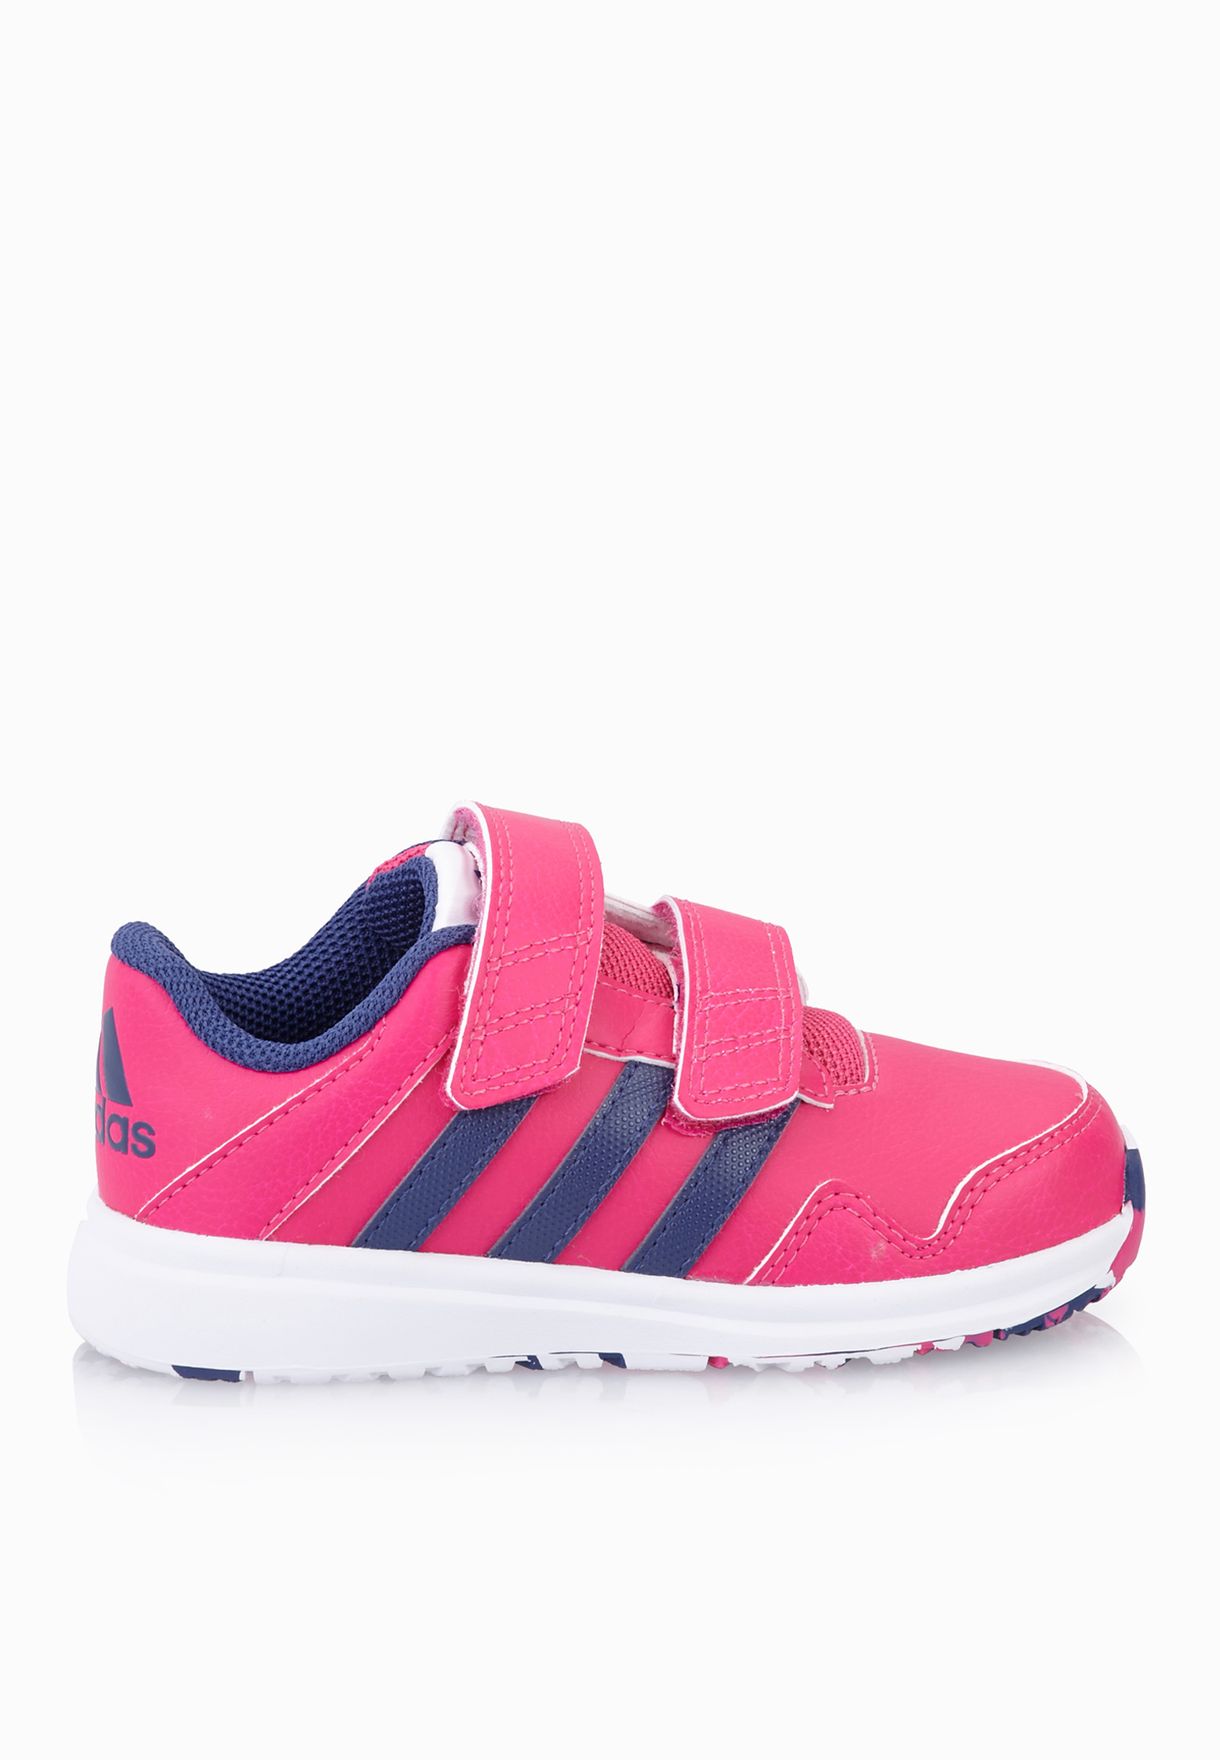 Asesinar medallista transferencia de dinero Buy adidas pink Snice 4 Infant for Kids in MENA, Worldwide